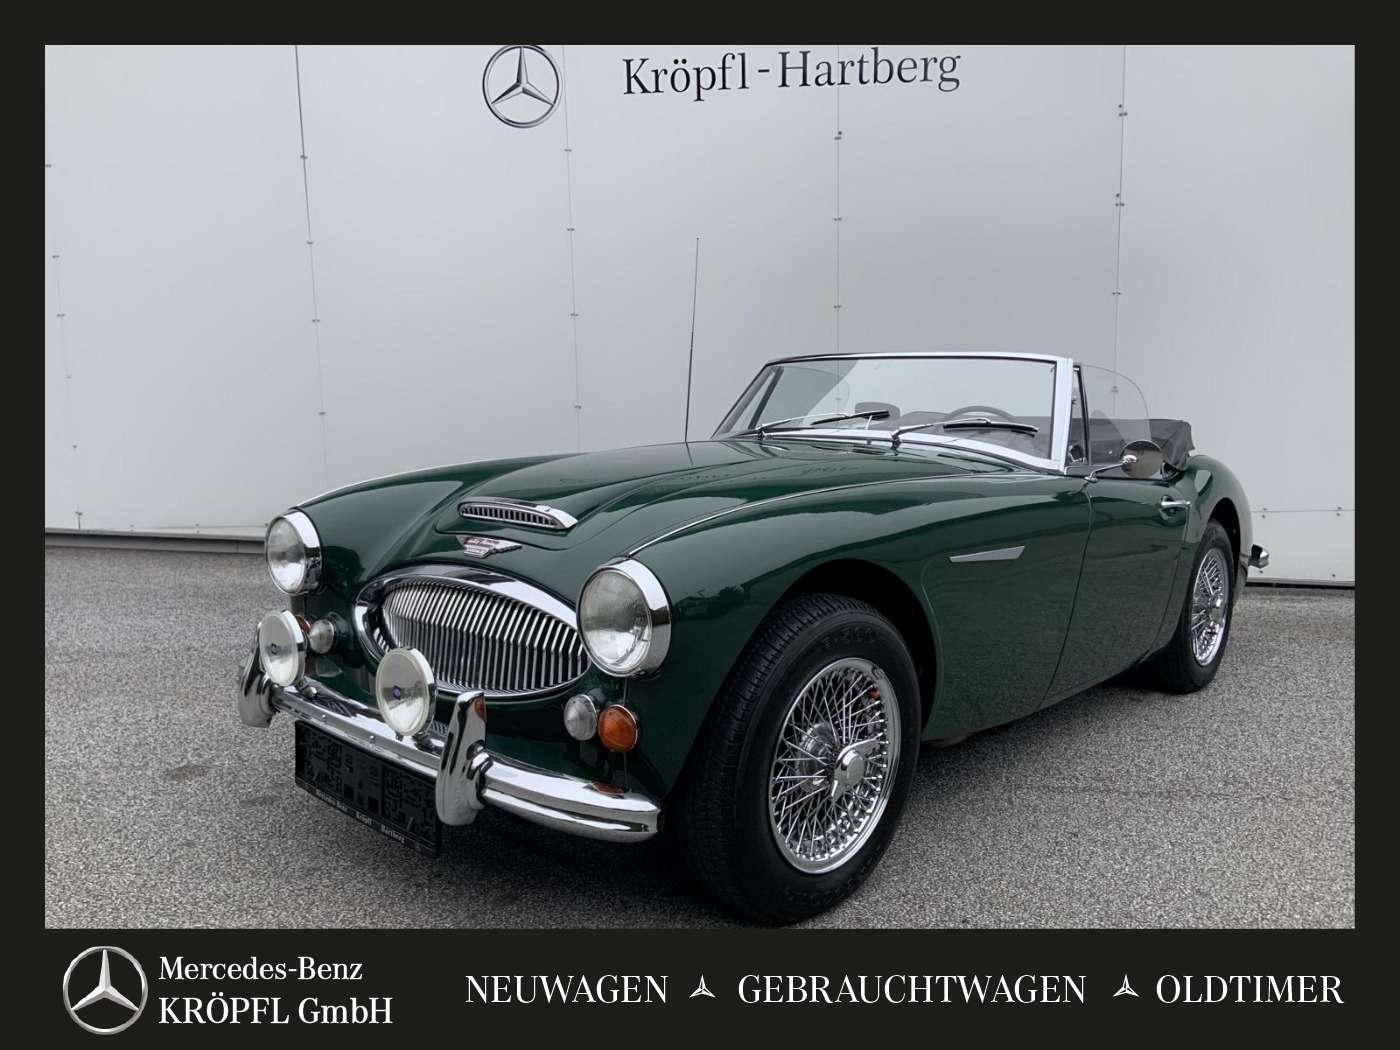 Austin Healey Convertible in Green antique / classic in Hartberg for € 67,900.-